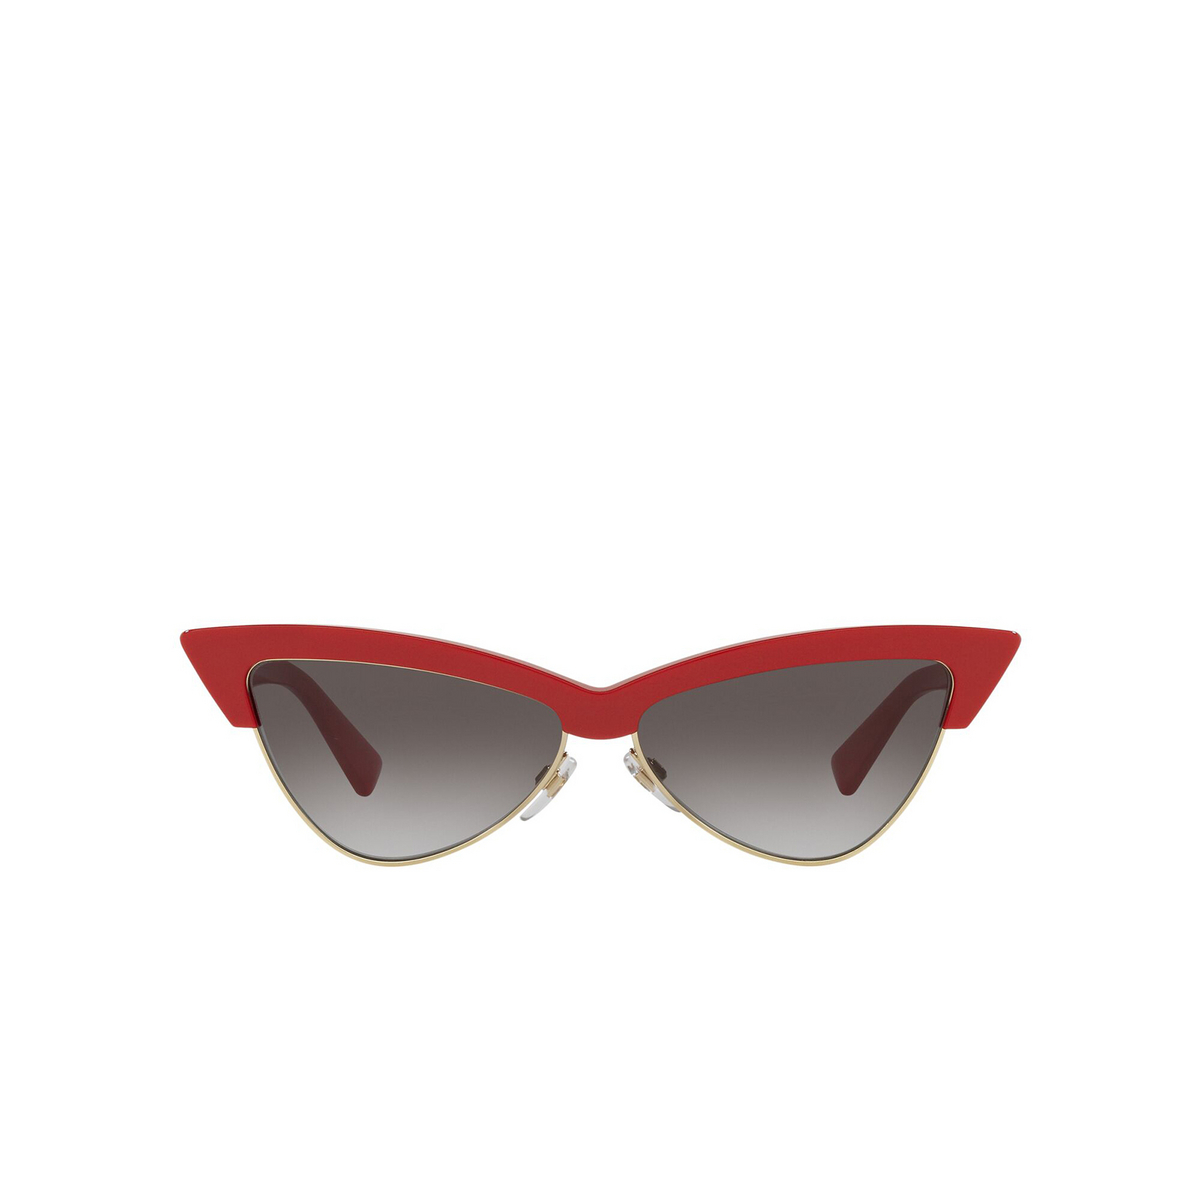 Valentino® Cat-eye Sunglasses: VA4102 color Red 51108G - front view.